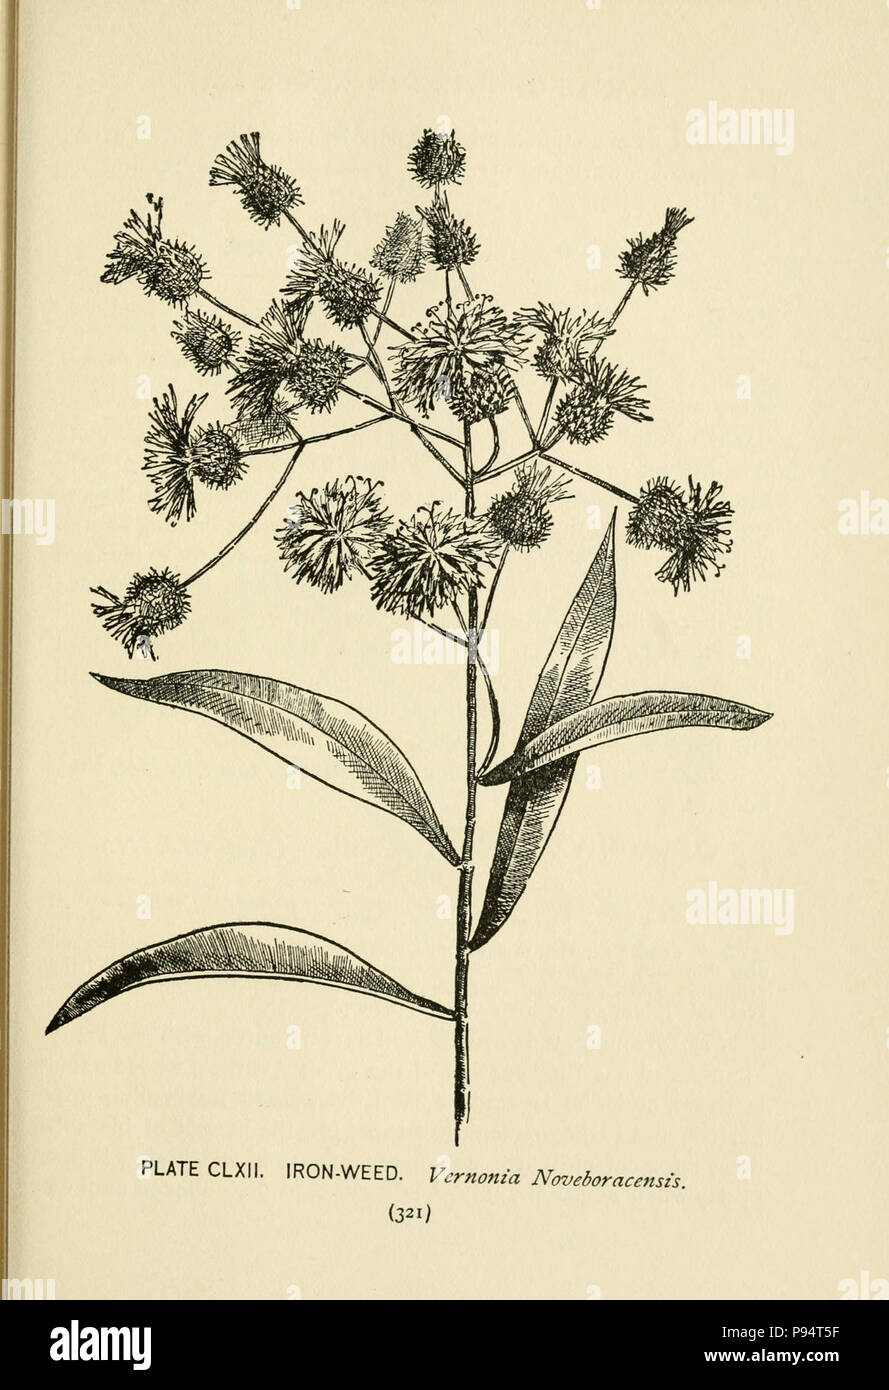 A guide to the wild flowers (Page 321, Plate CLXII) . Stock Photo